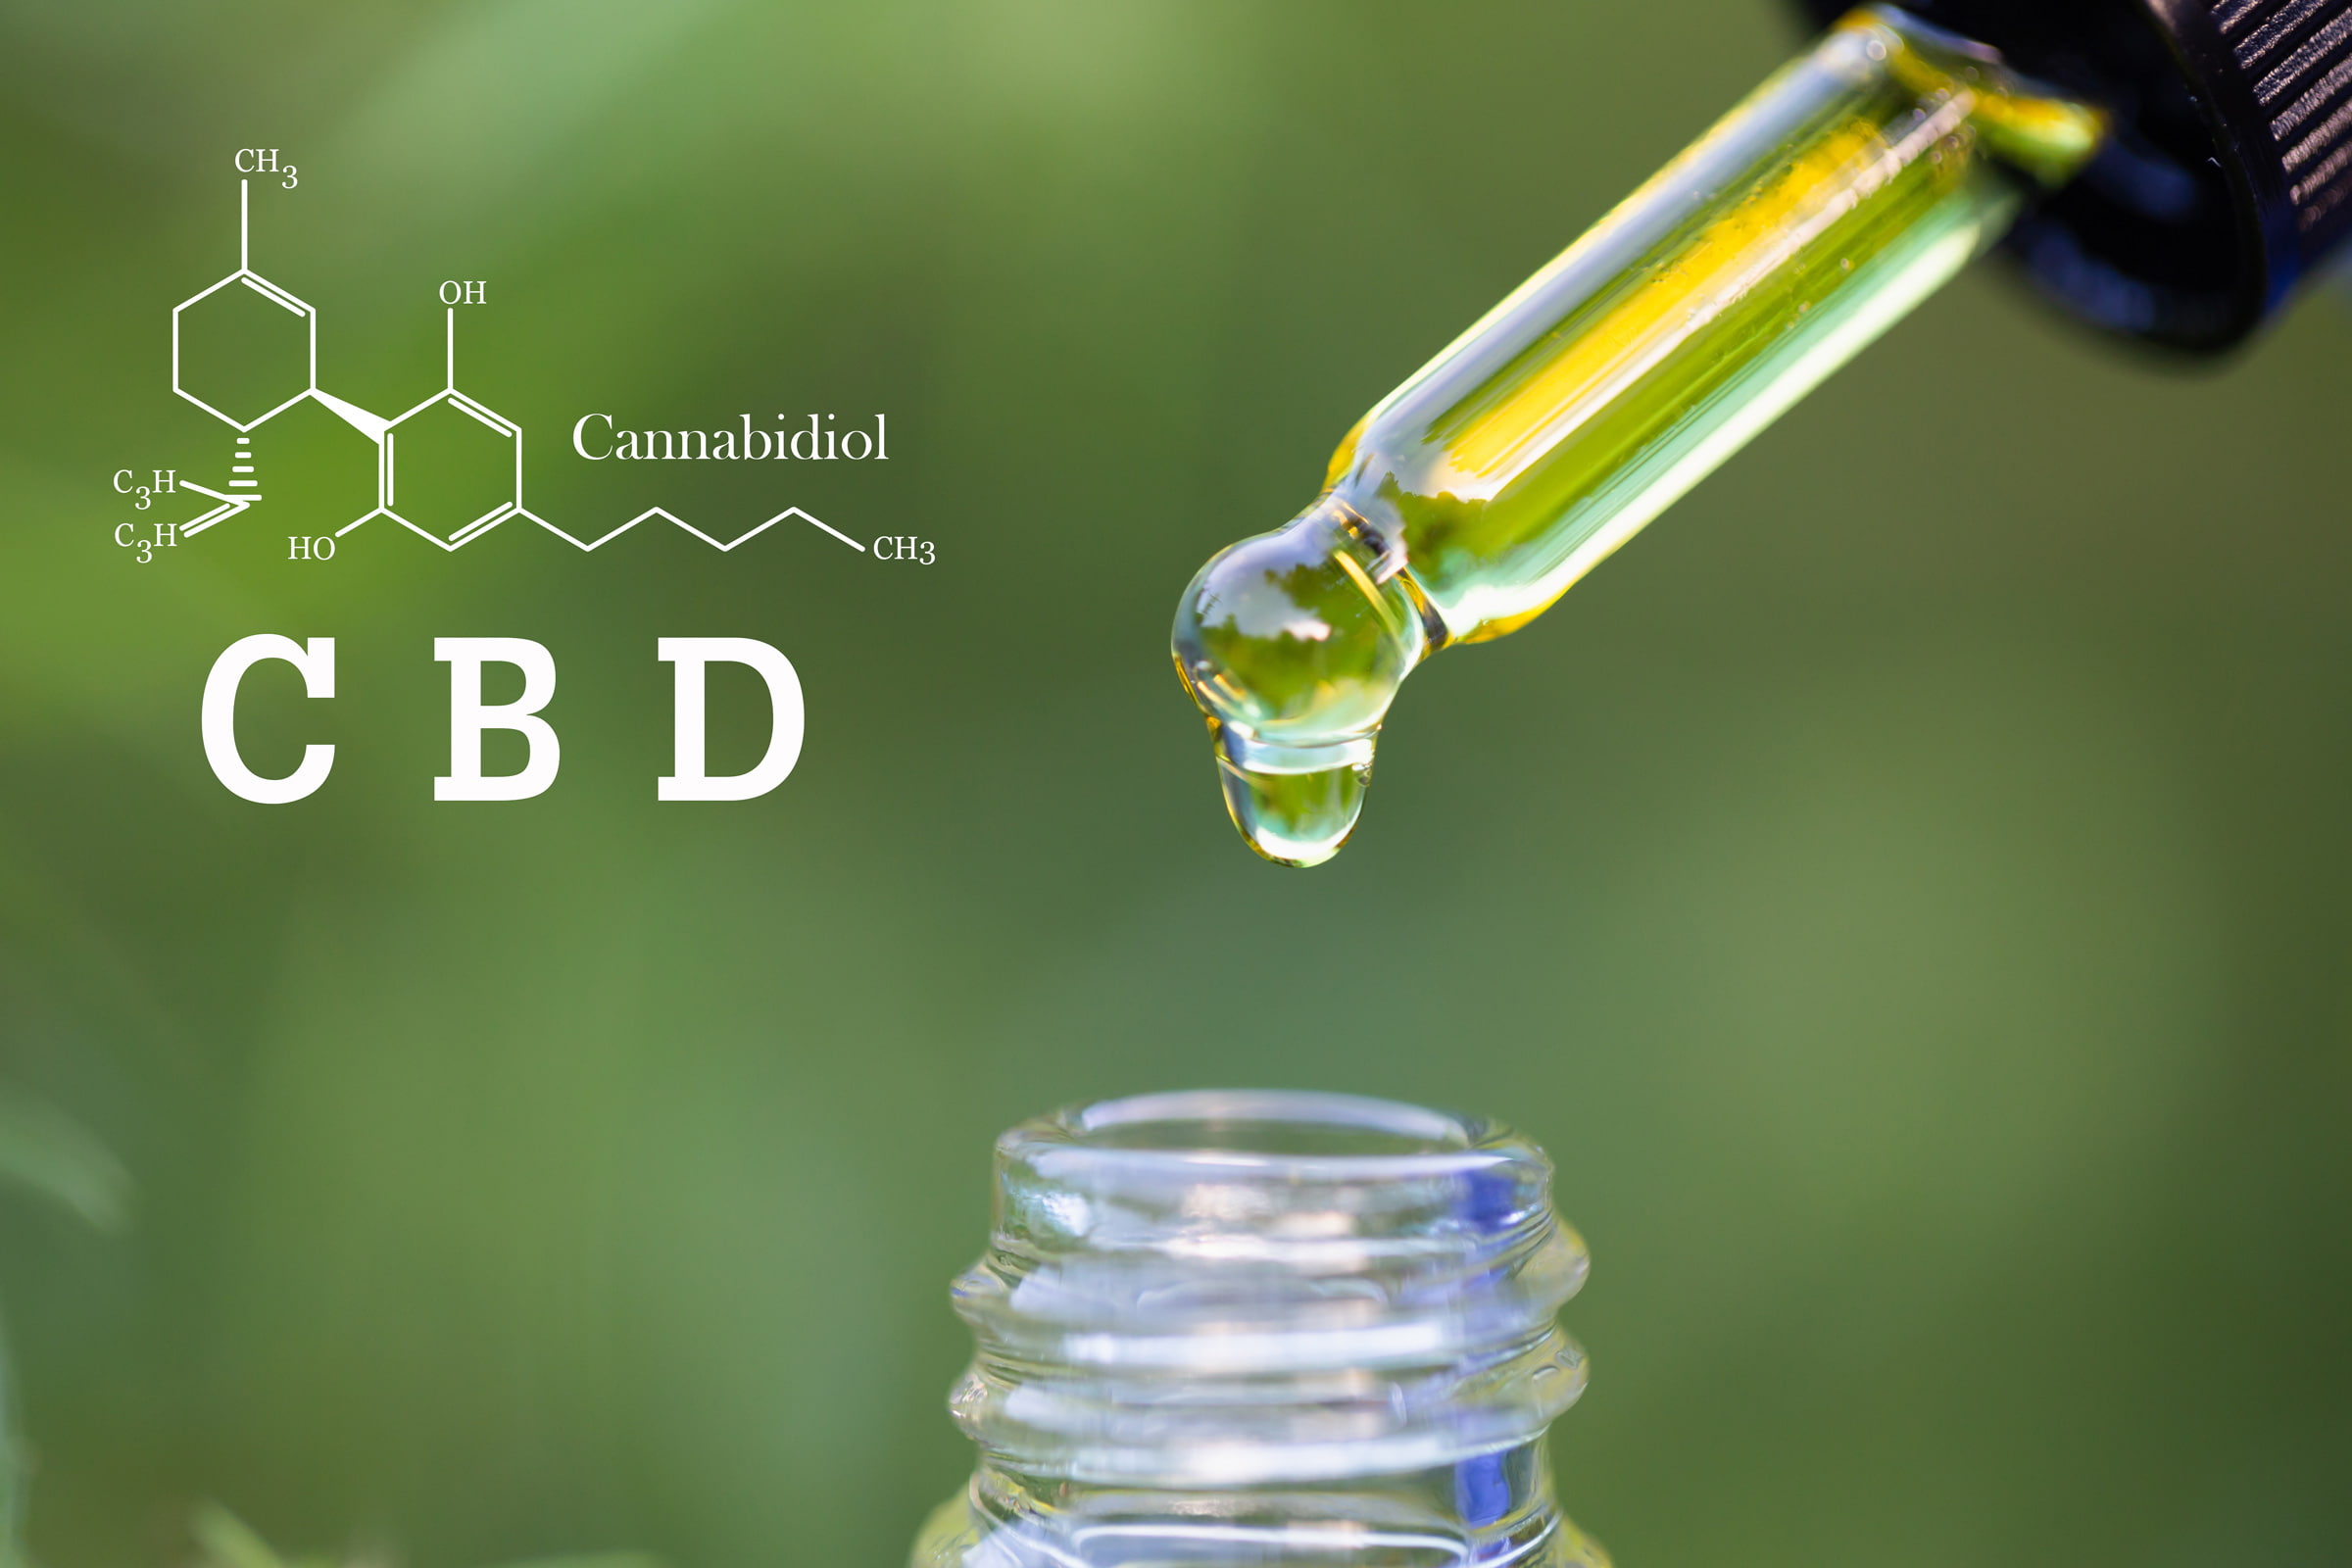 CBD chemical formula and oil in pipette